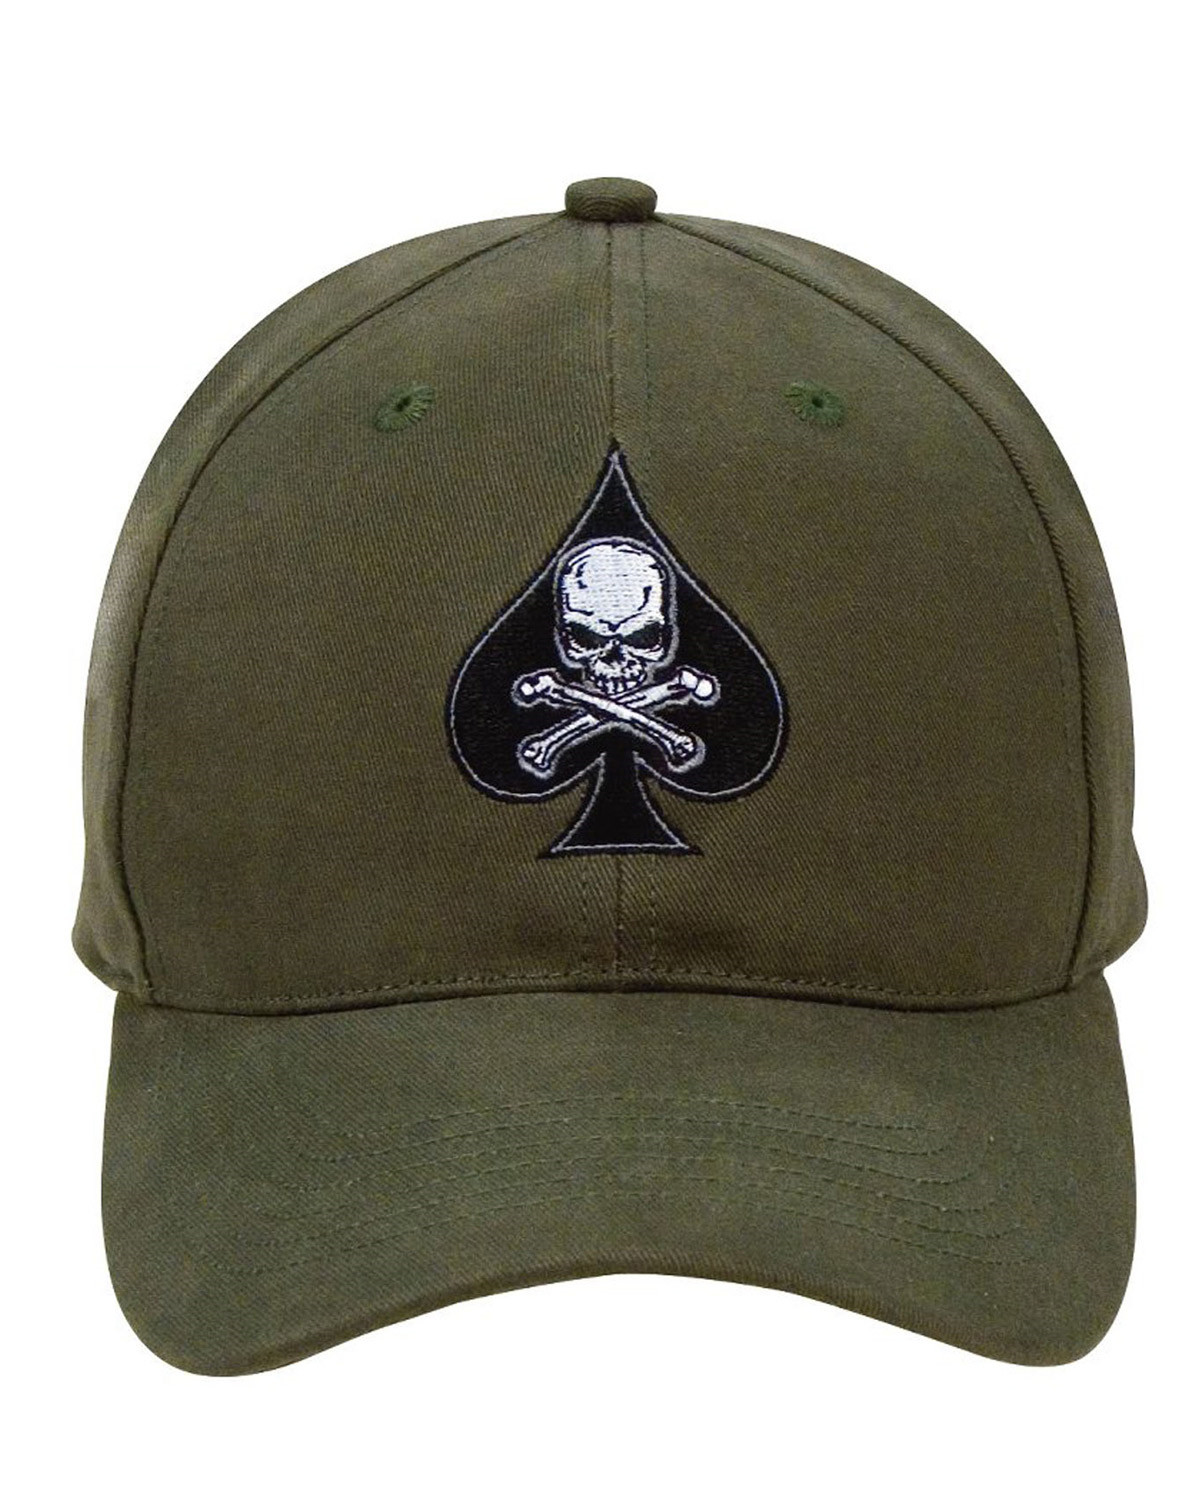 2: Rothco Black Ink Death Spade Low Profile Insignia Cap Olive (Oliven, One Size)